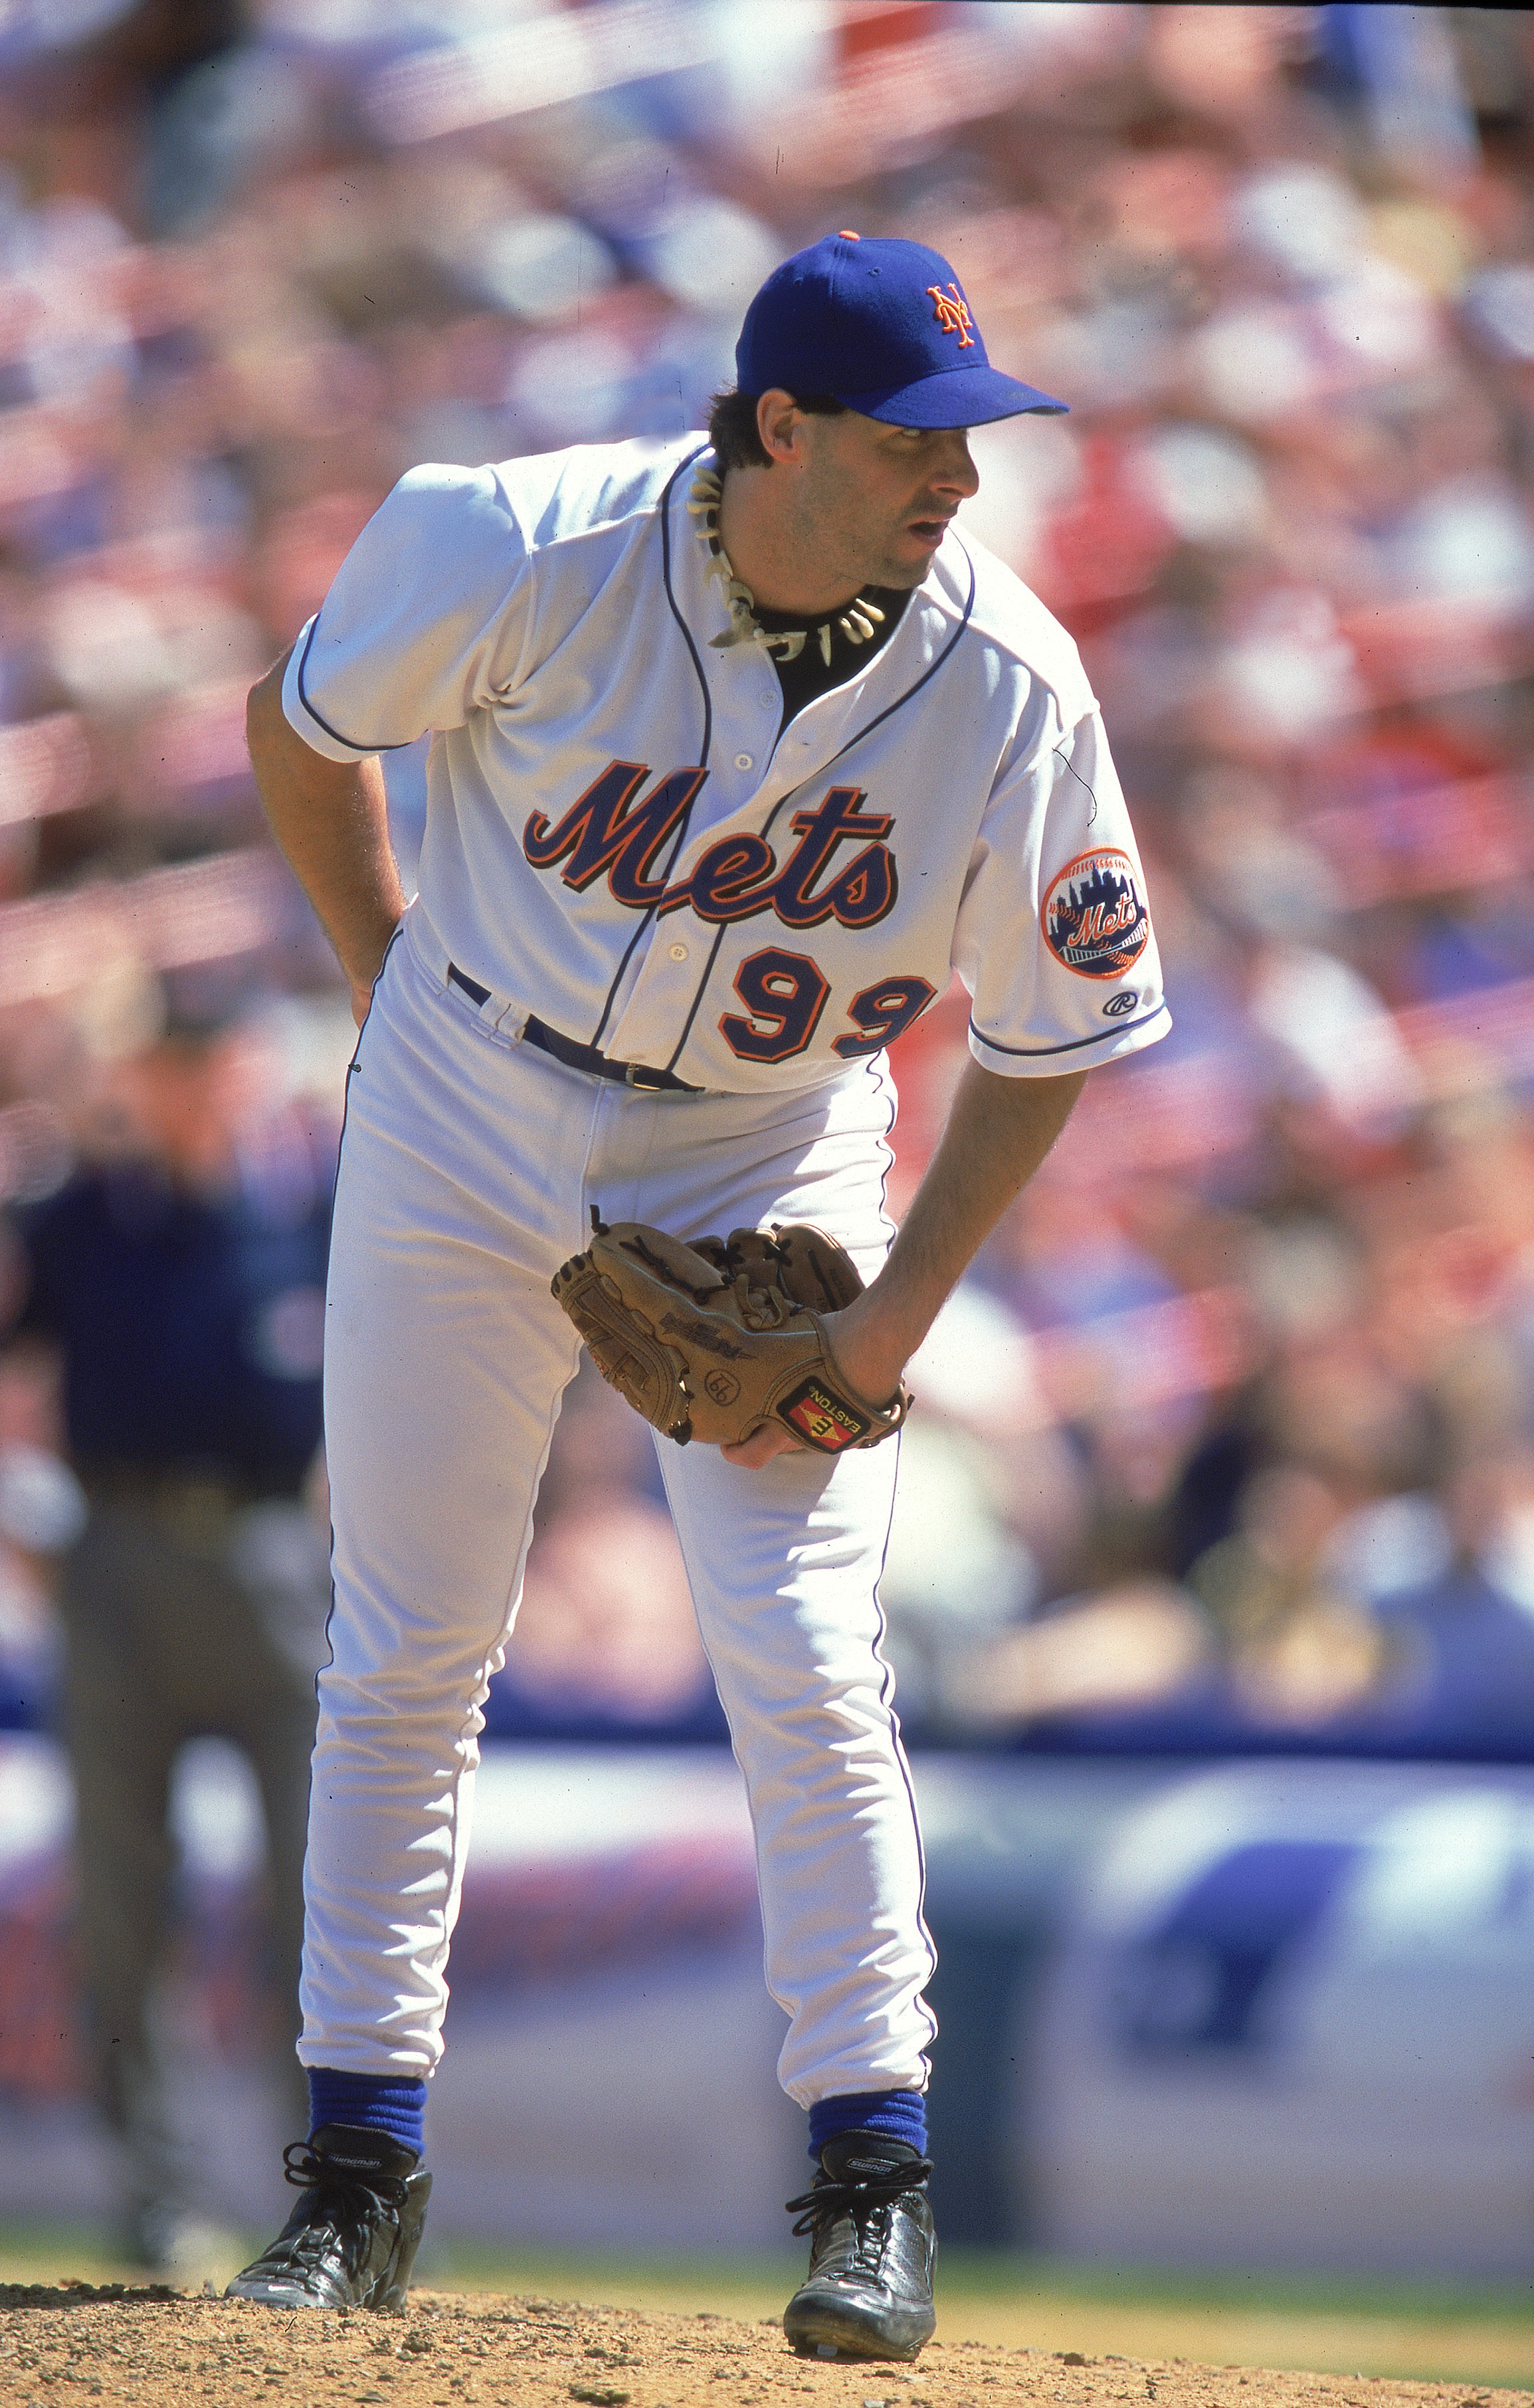 17 Aug 2000:  Pitcher Turk Wendell #99 of the New York Mets looks for the sign during the game against the Colorado Rockies at Shea Stadium in Flushing, New York. The Mets defeated the Rockies 2-1.Mandatory Credit: Jamie Squire  /Allsport